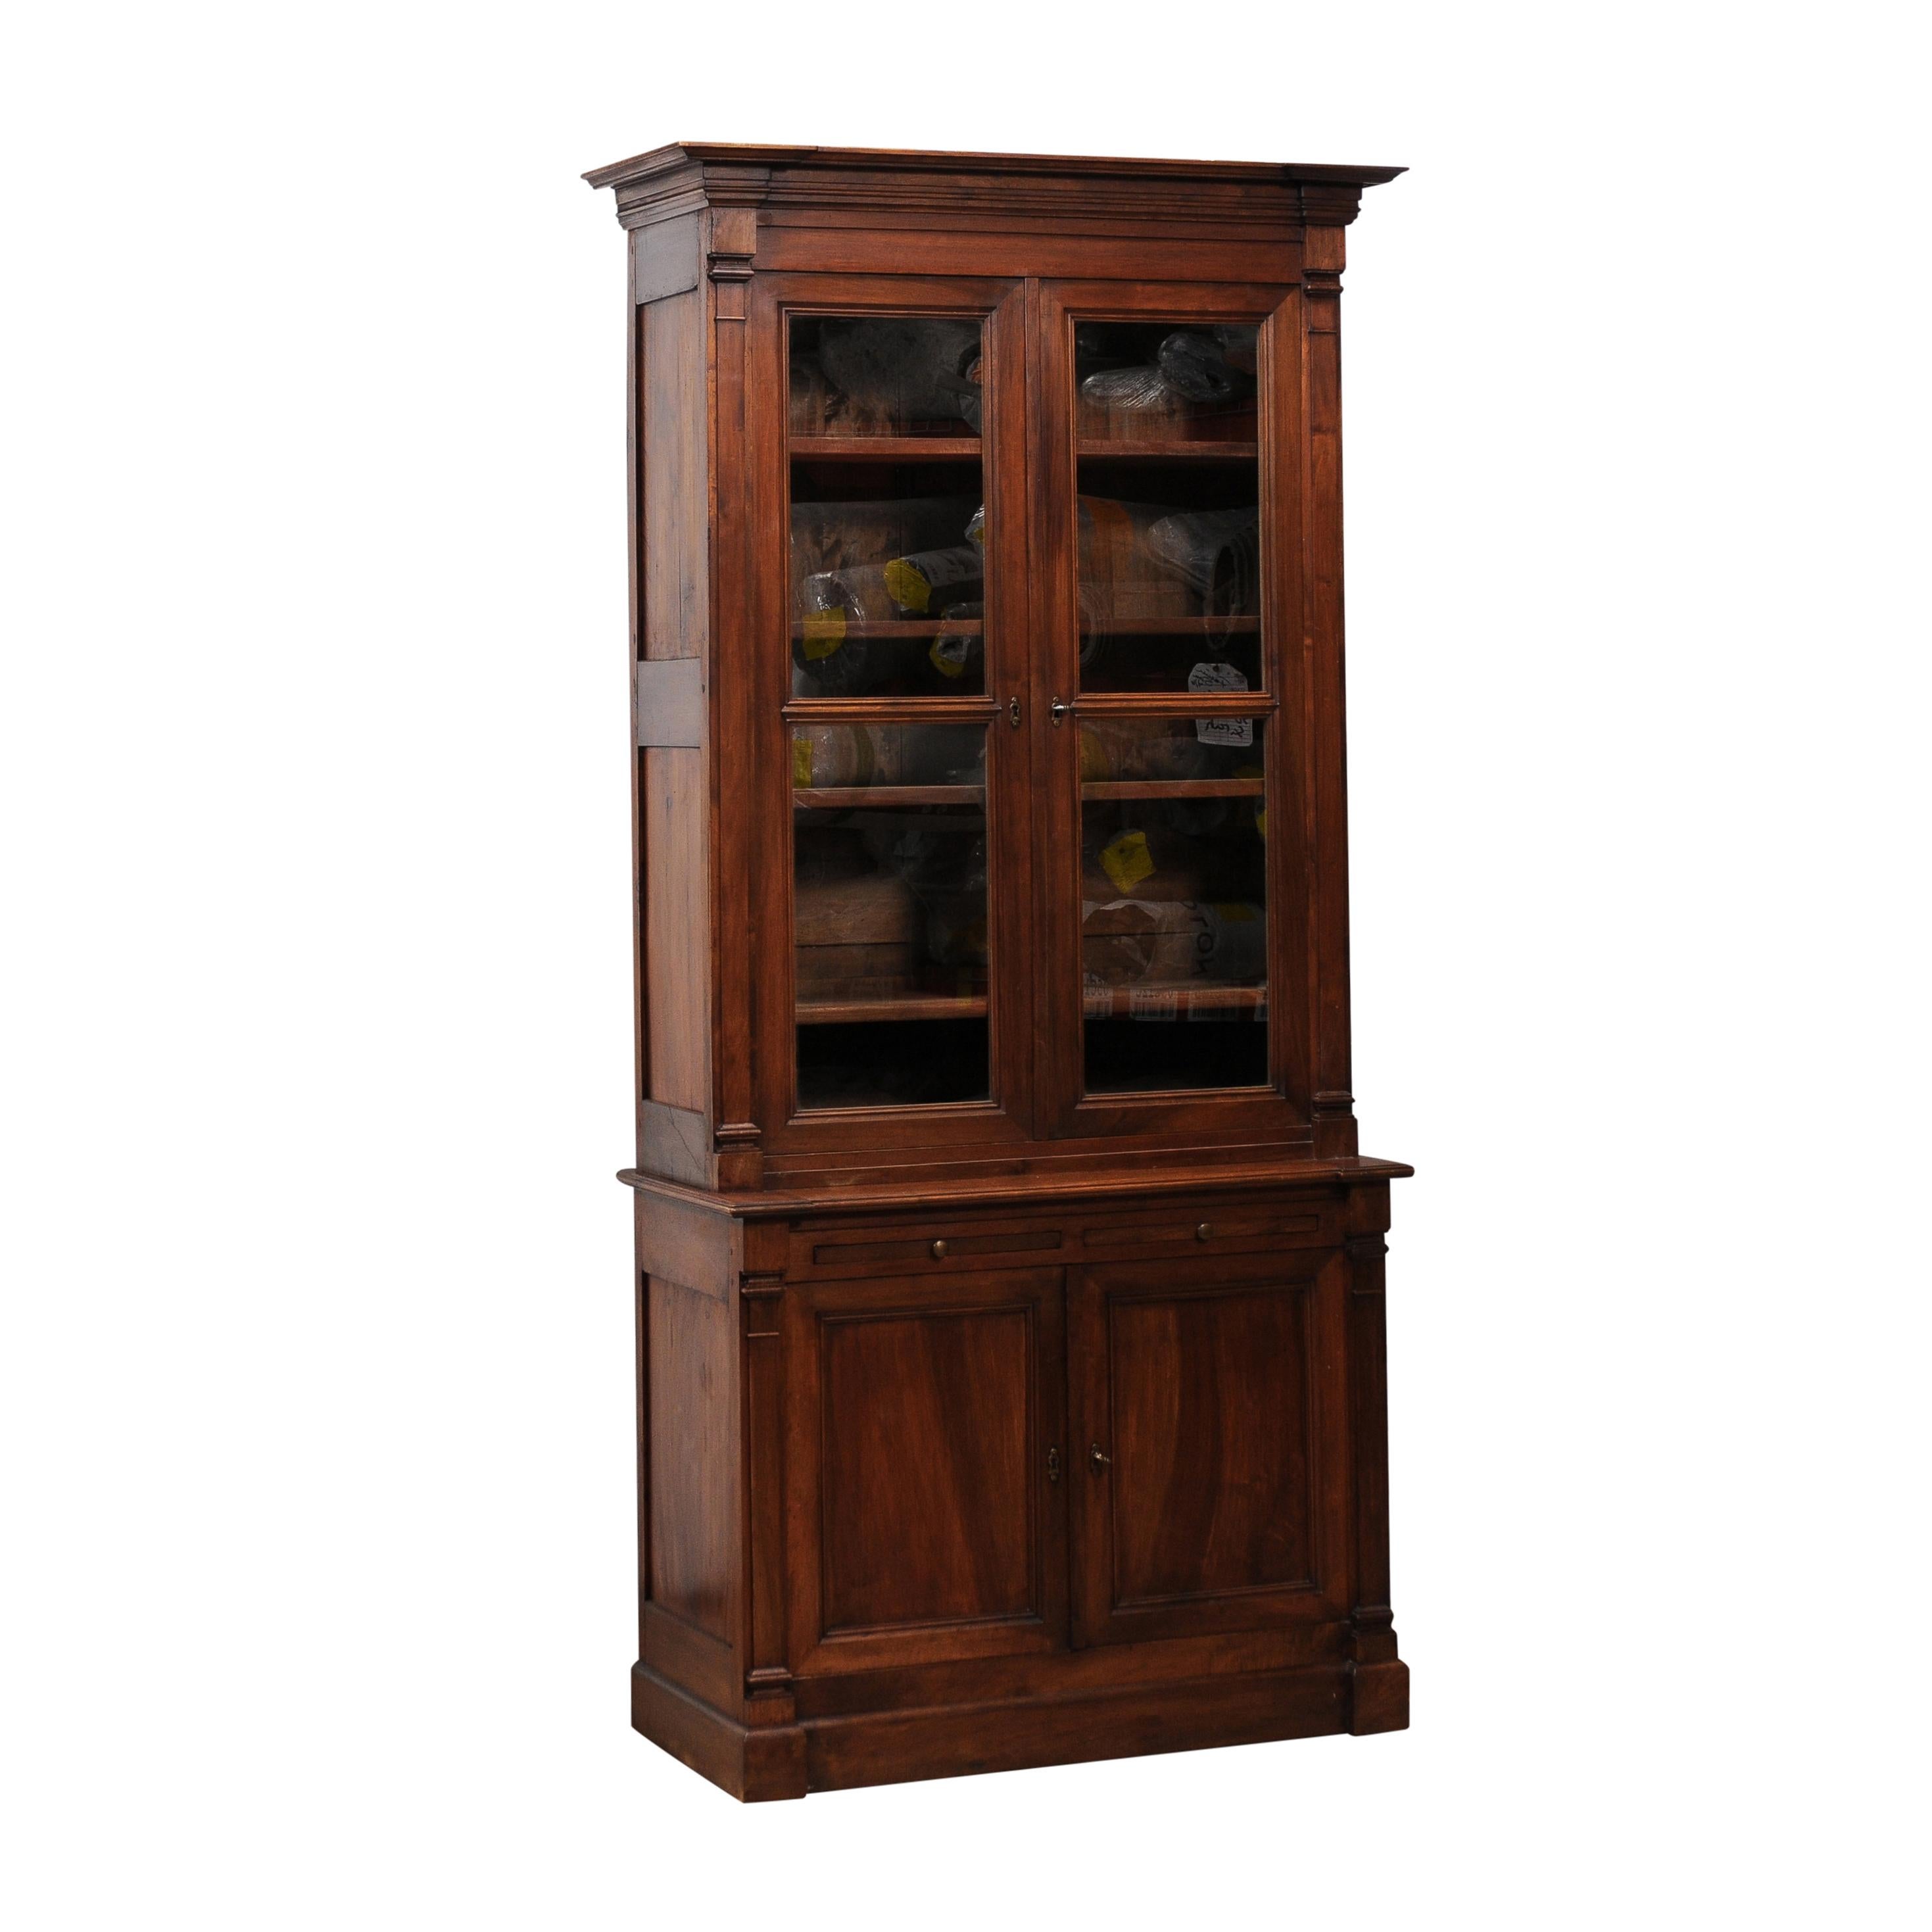 Louis XVI Style 1890s French Bookcase with Glass Doors and Pull Out Drawers For Sale 7